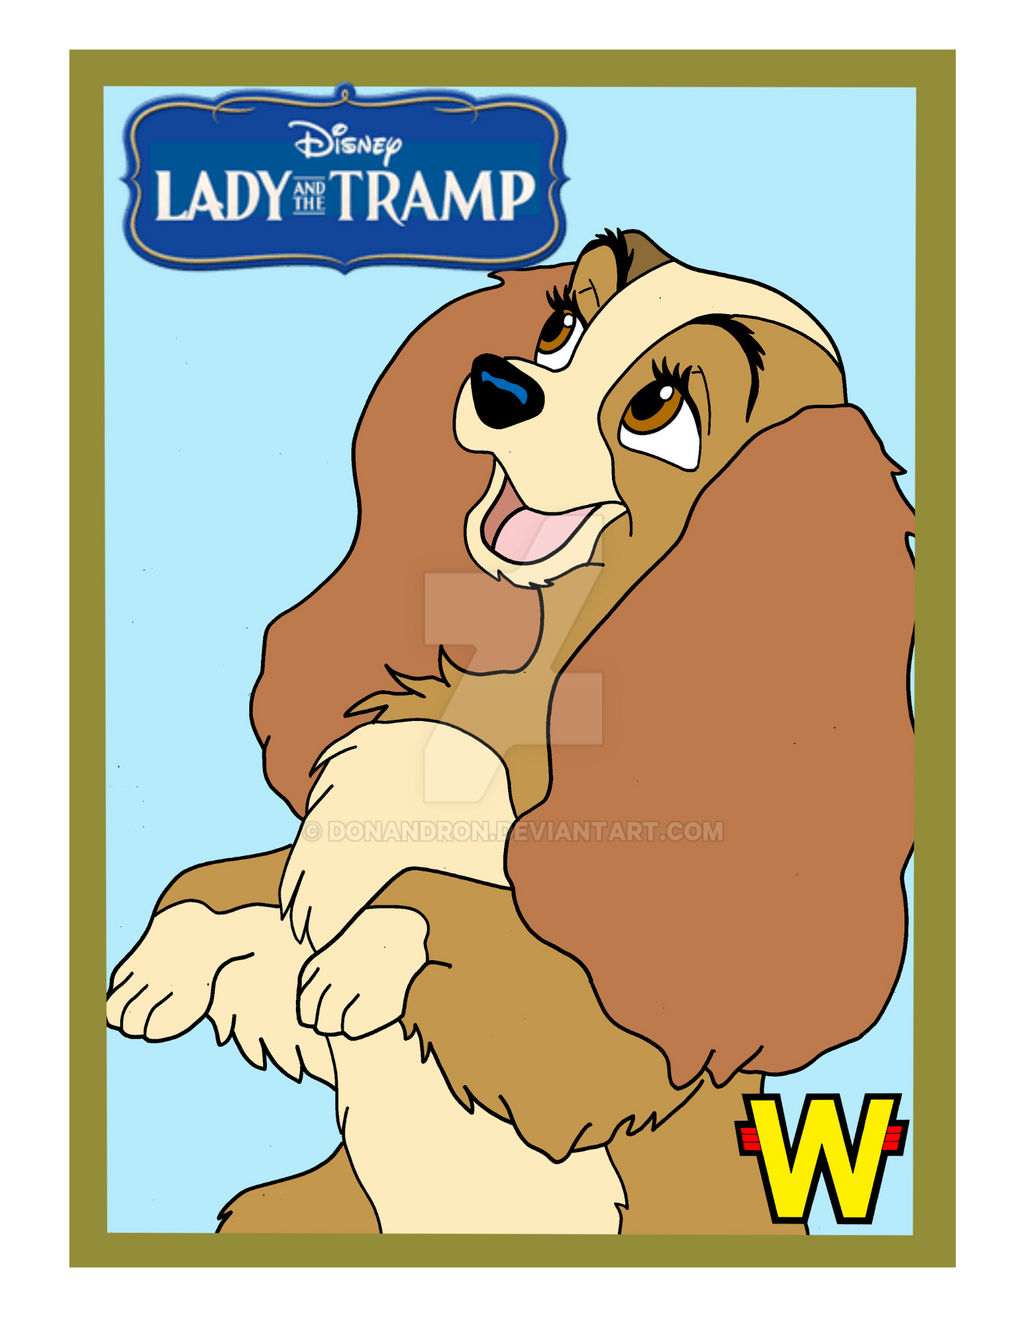 Lady and the Tramp by lambini on DeviantArt